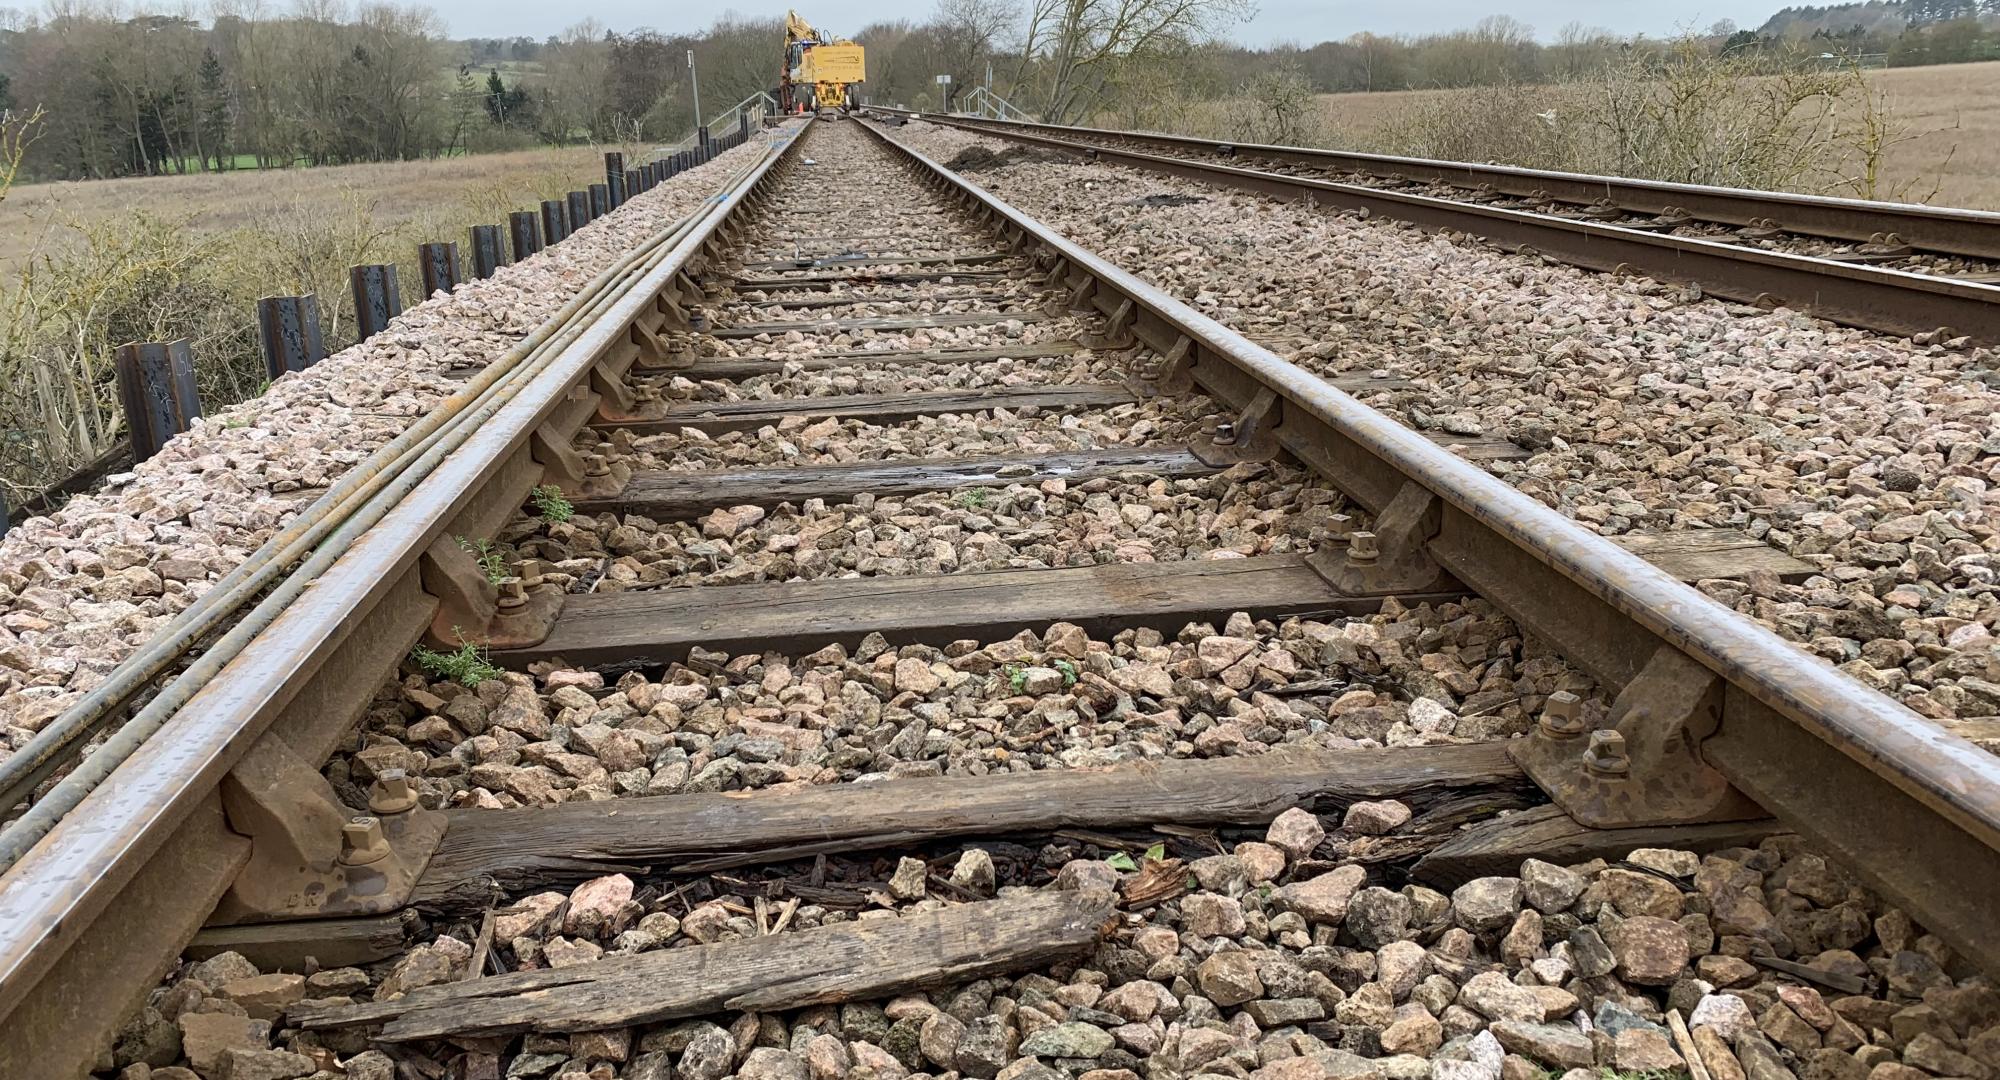 100 year old track to be replaced as part of Ipswich-Lowestoft Line improvements